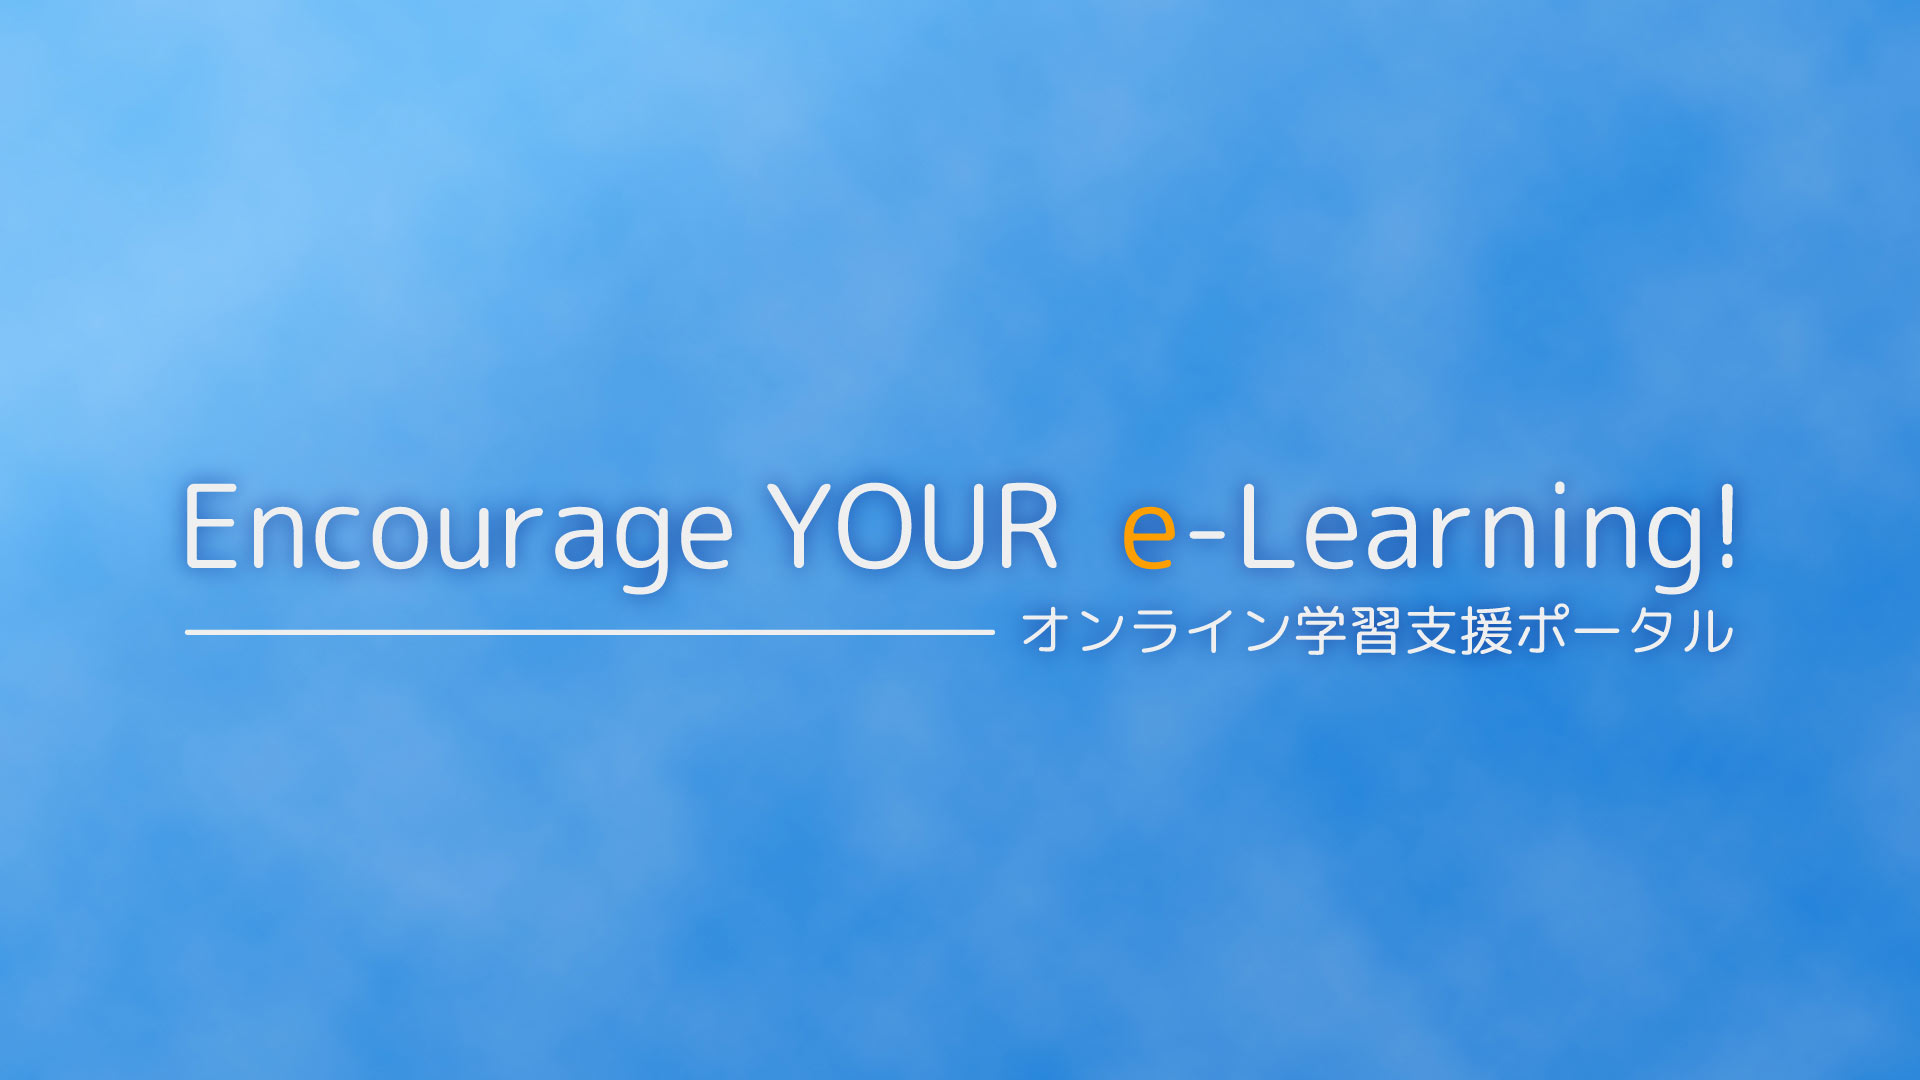 Encourage YOUR e-Learning! オンライン学習支援ポータル